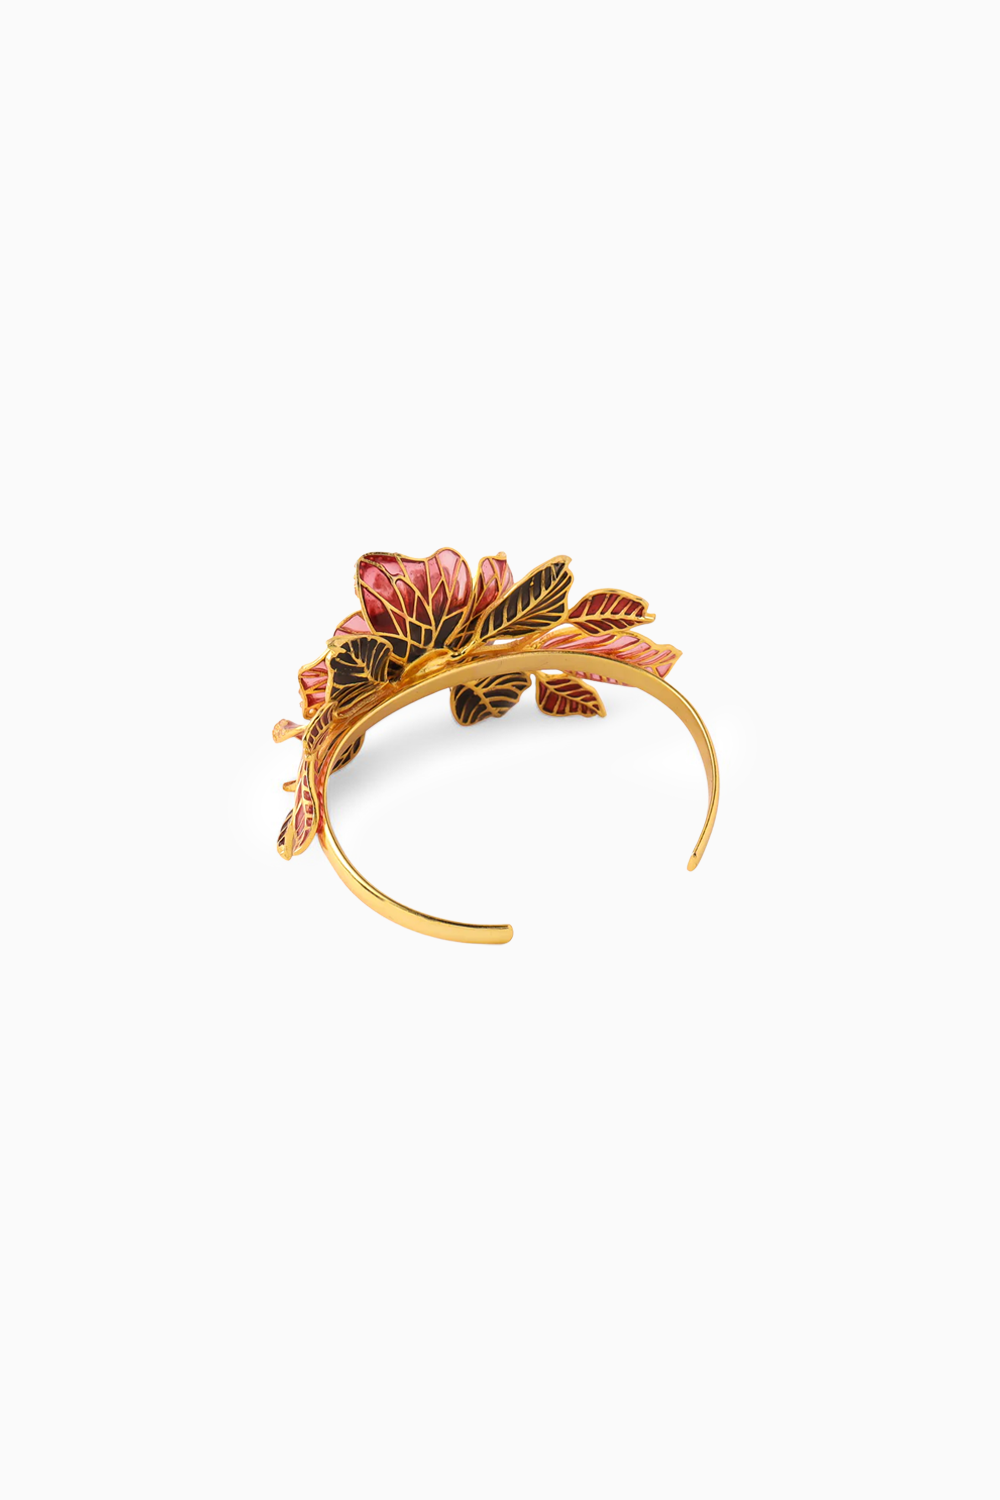 Red and Black Fiore Floral Cuff